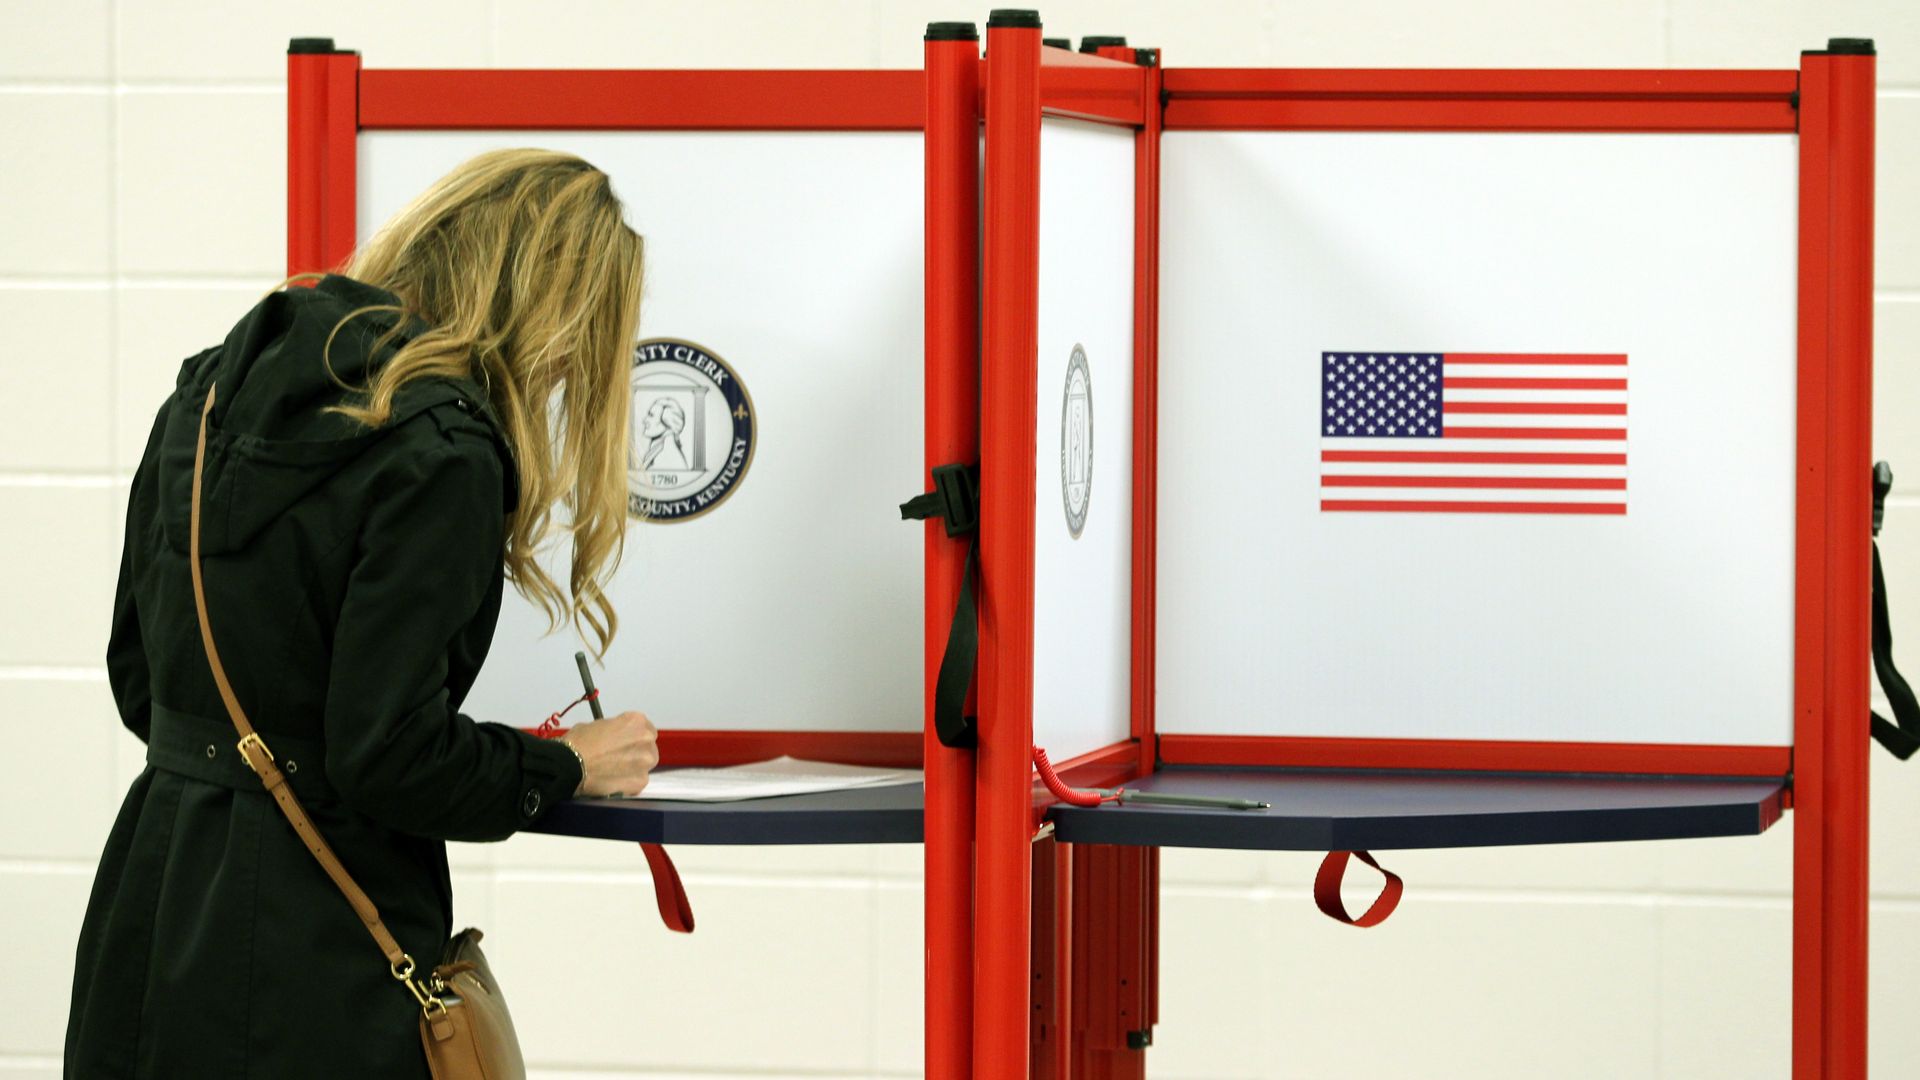 In this image, a woman leans over a voting booth